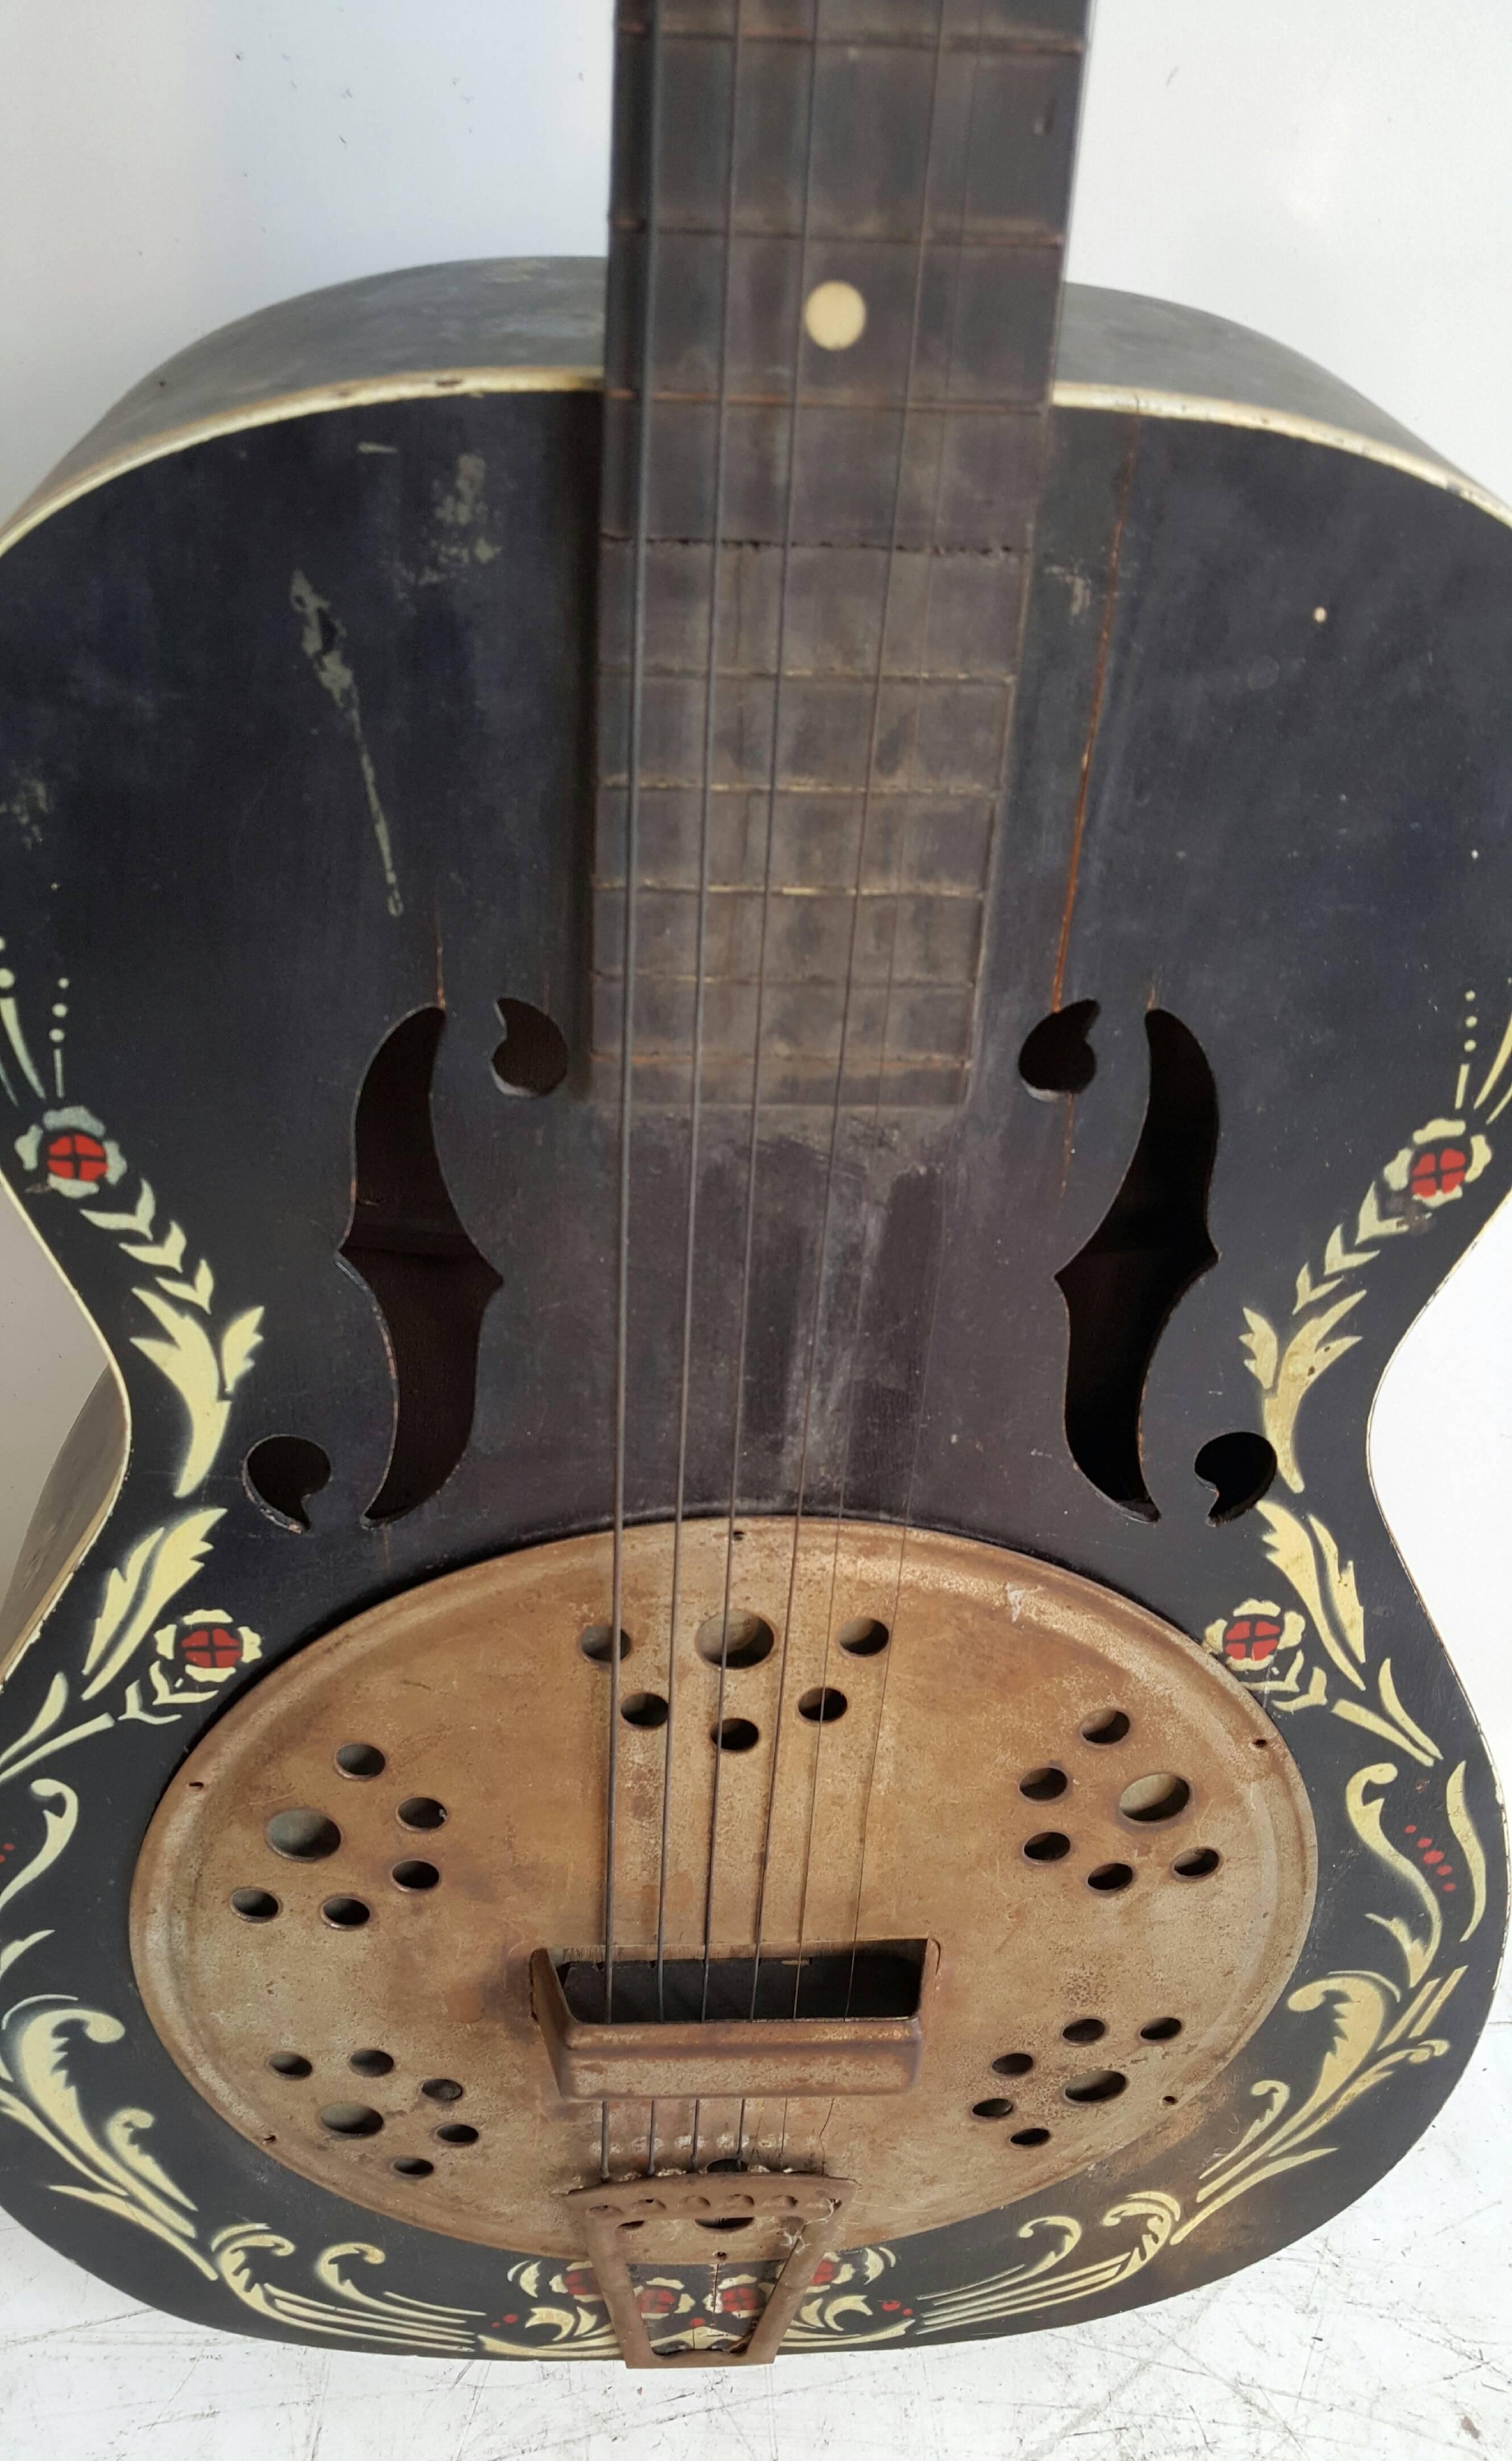 Nice antique Del Oro Faux Resonator guitar. Charming stencilled graphic design,, All original, head stock tuners, bridge and resonator. Piece of art sculpture although I’m sure guitar can be restored and would sound amazing. Kay Del Oro Pre-WWII